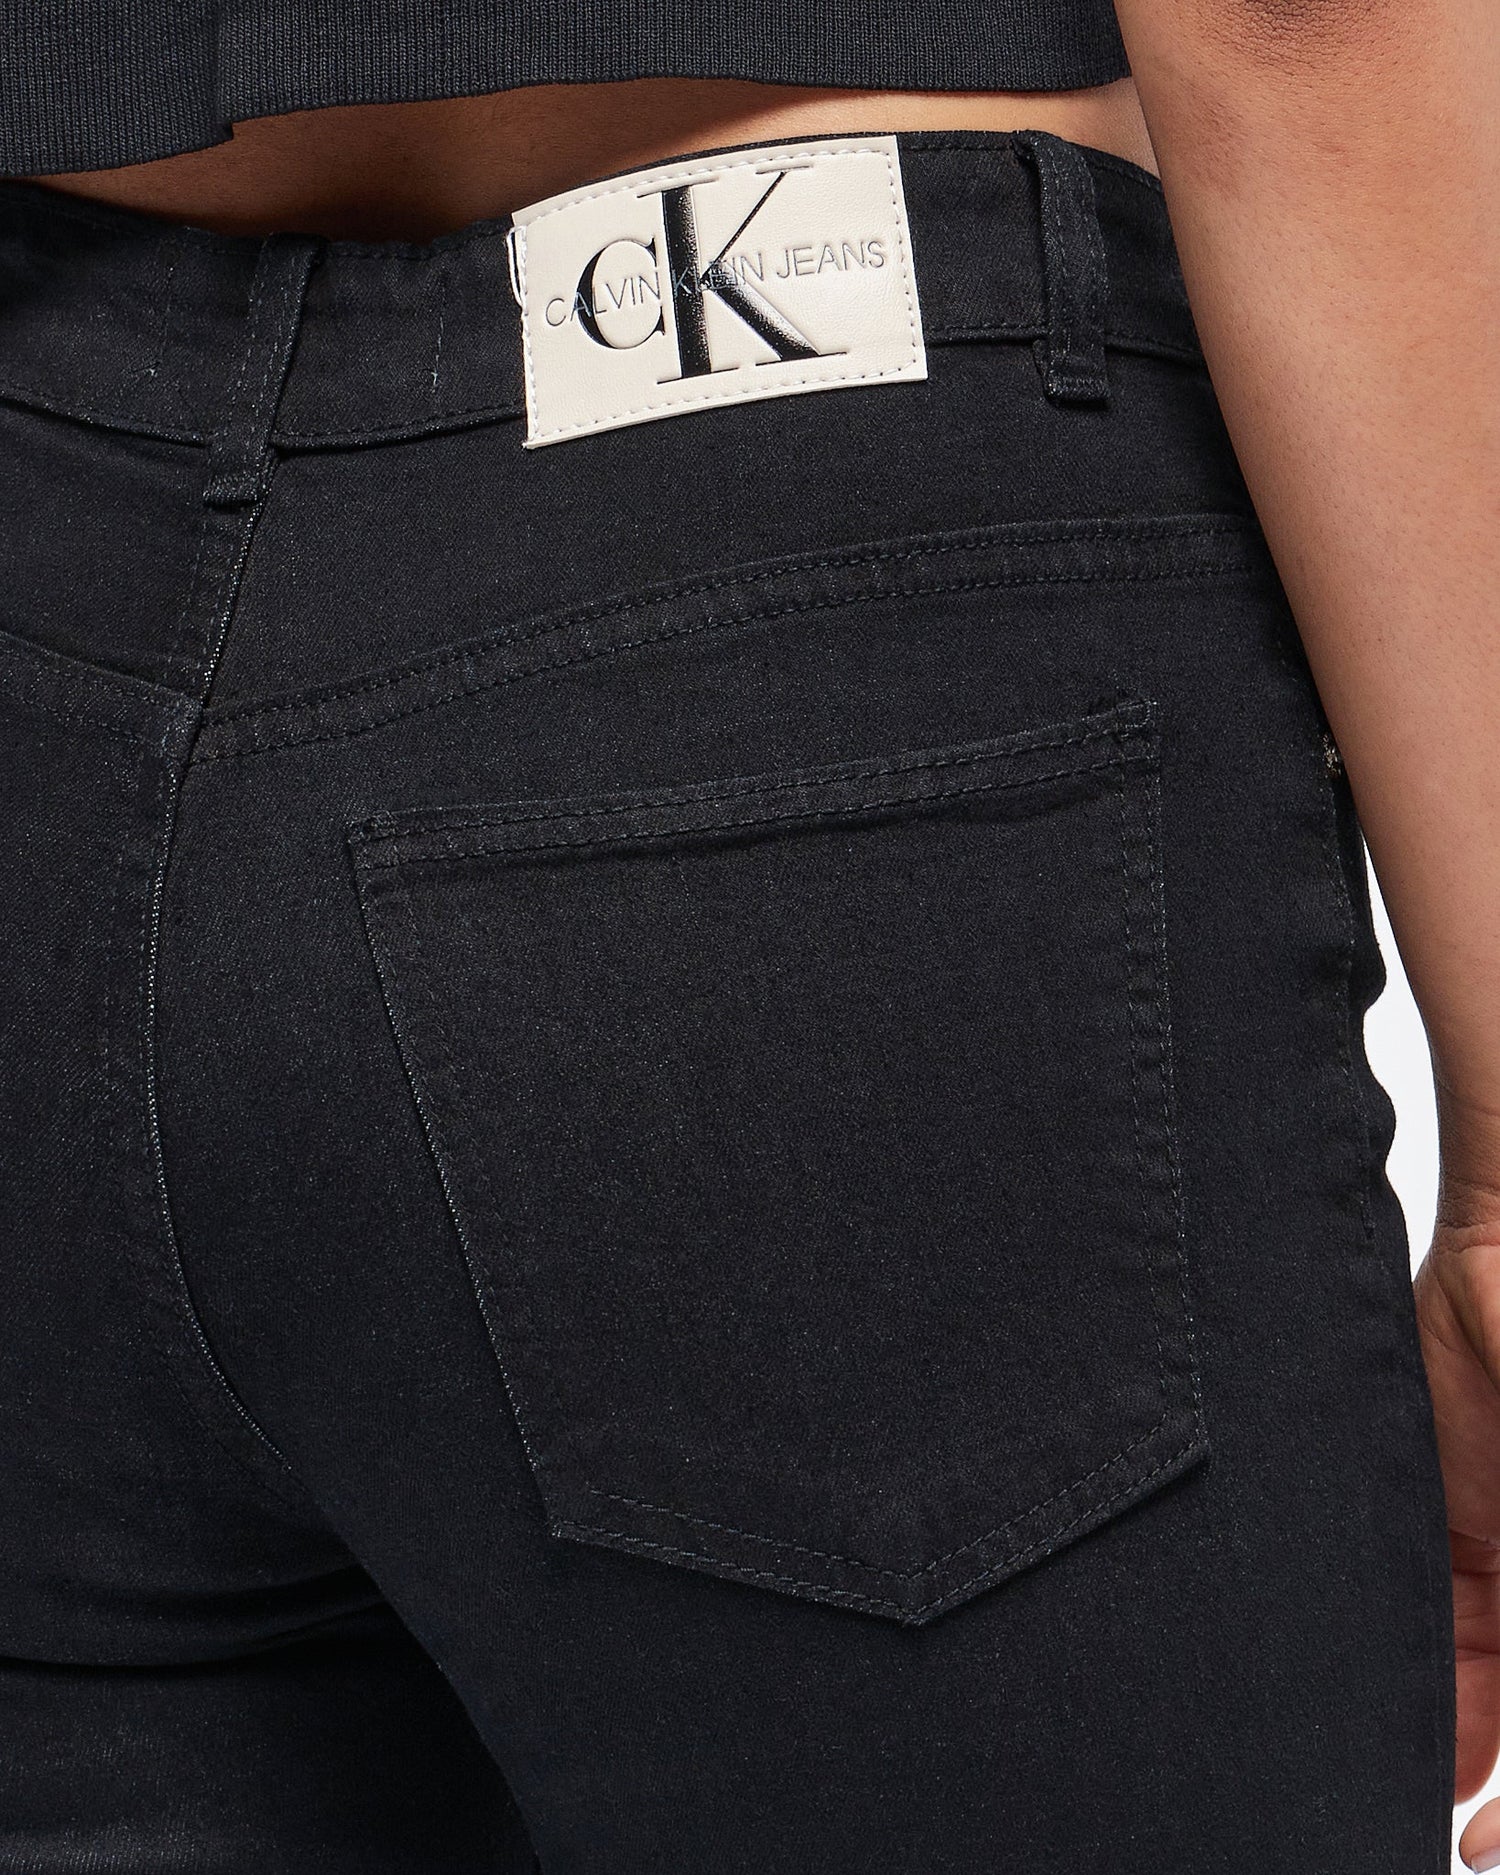 MOI OUTFIT-CK High Waist Slim Fit Lady Jeans 18.90